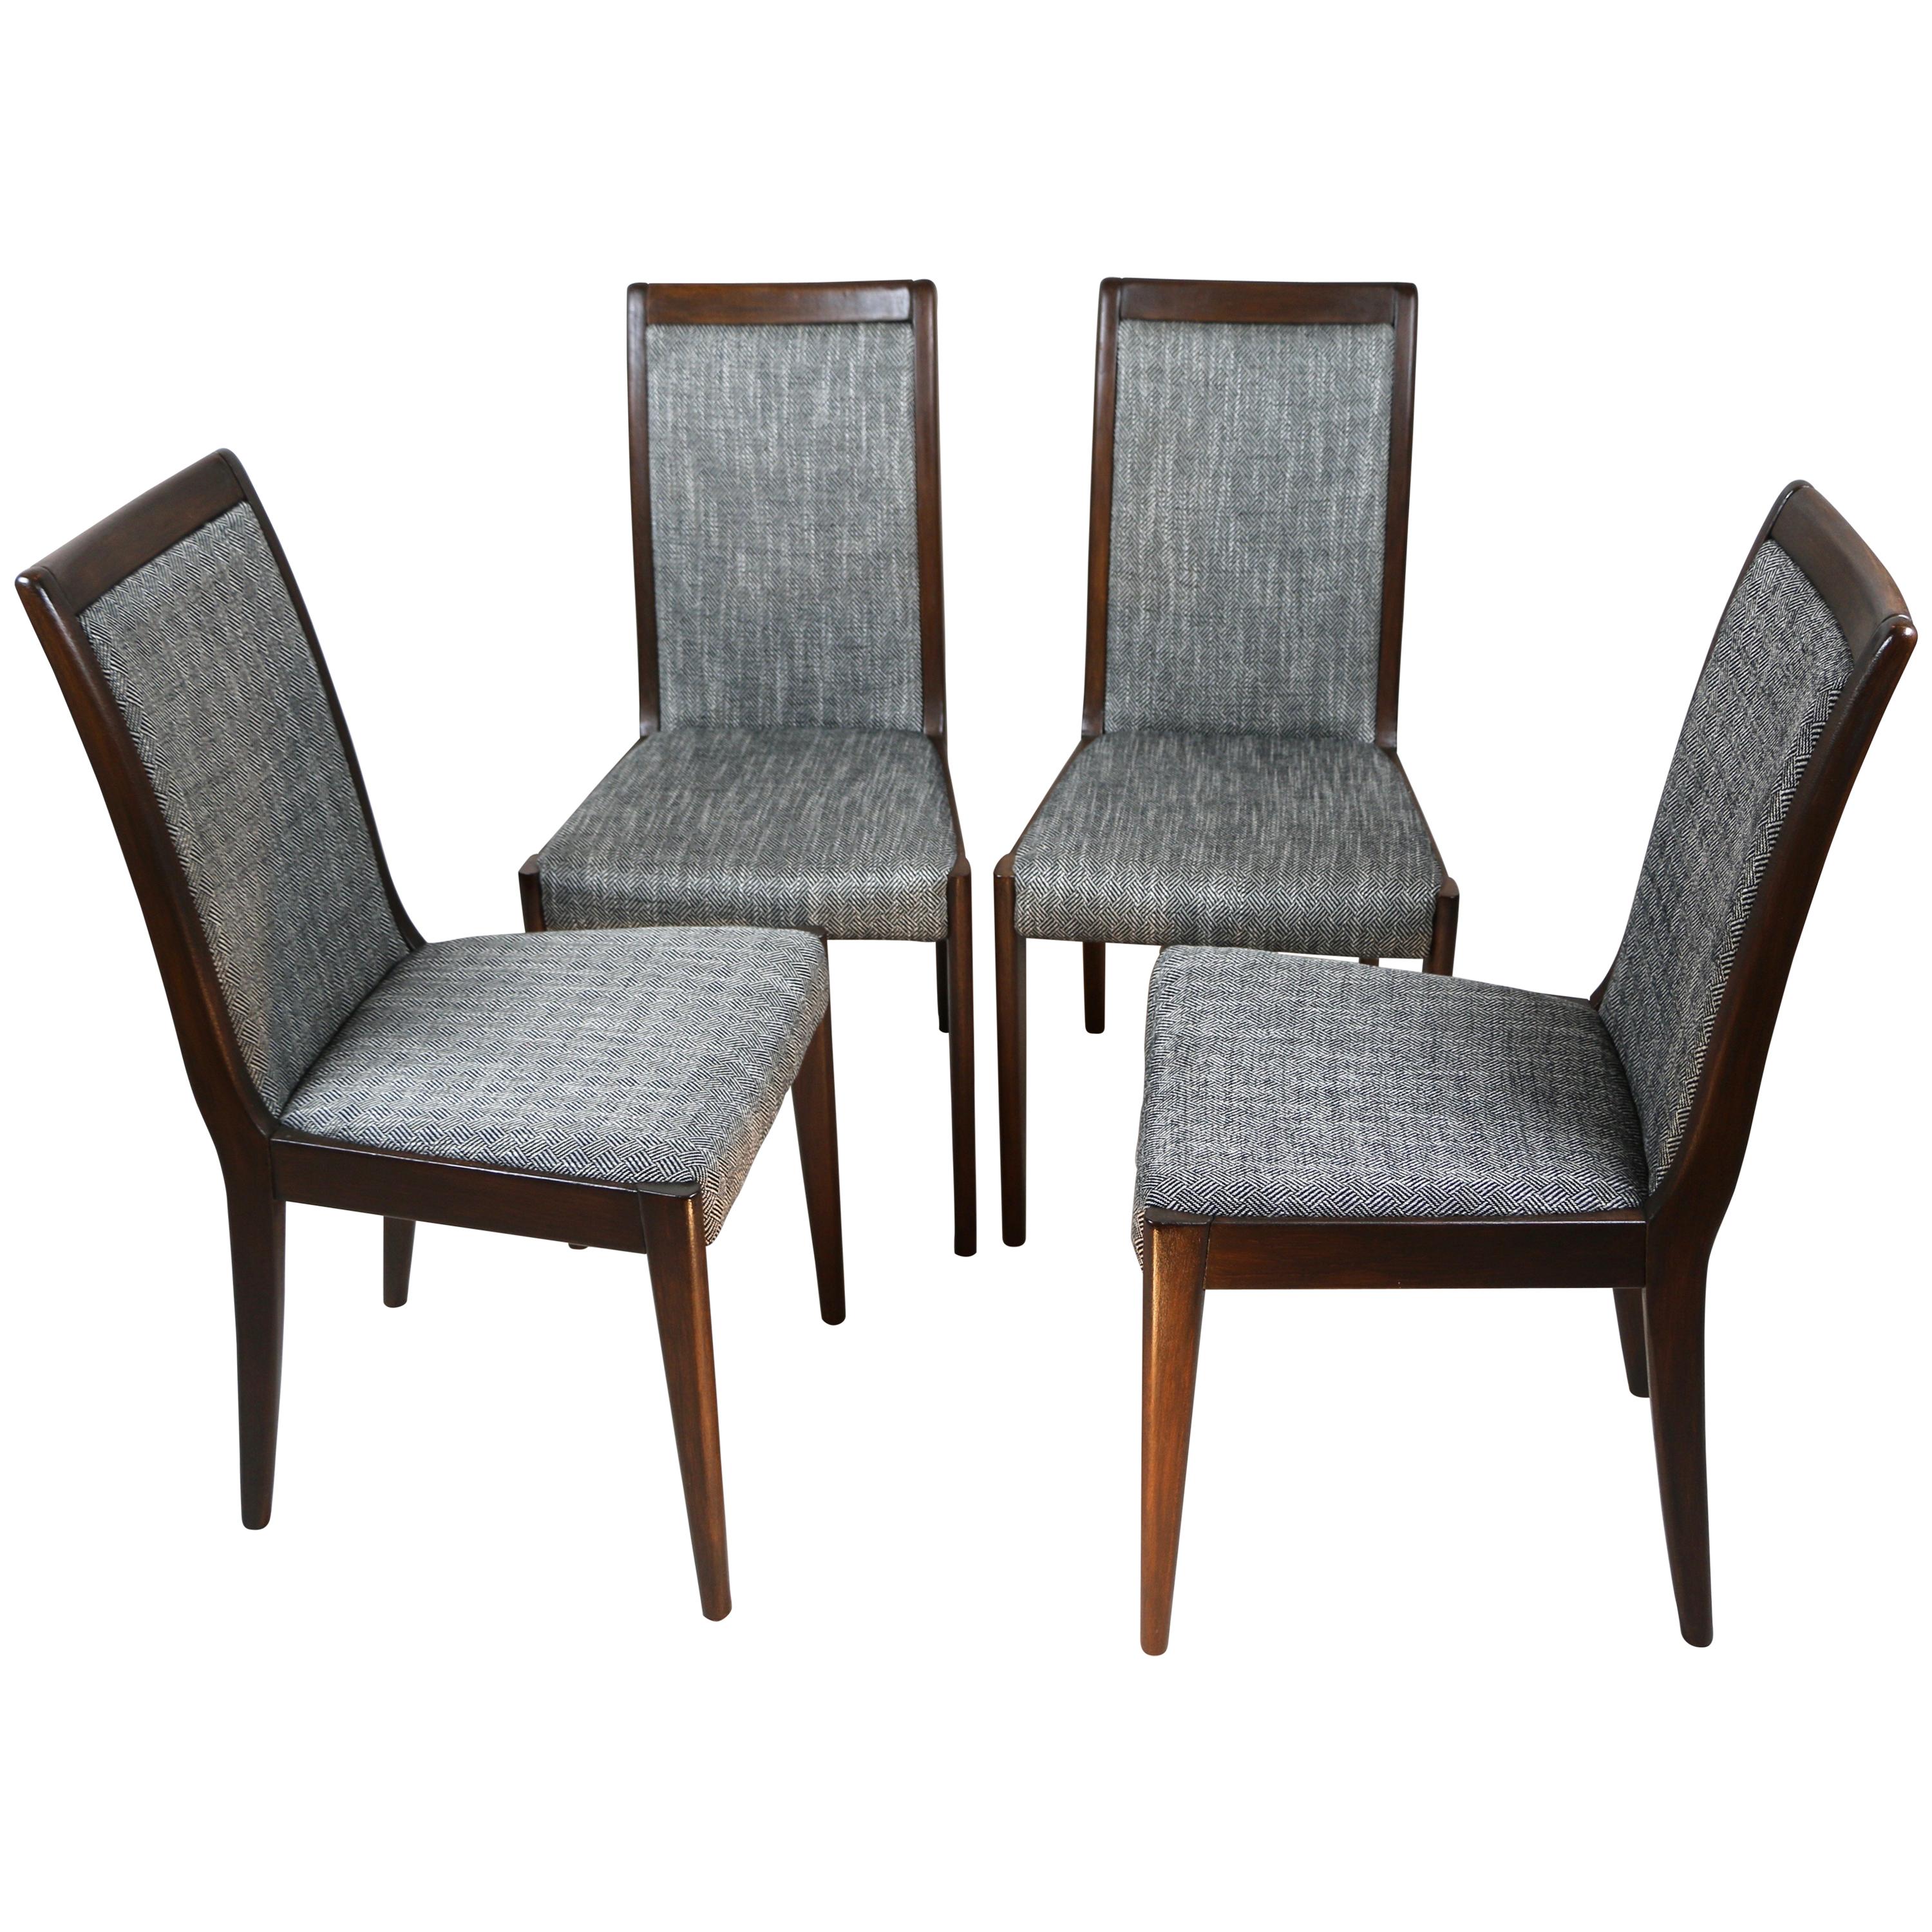 Set of 4 Black and White Natural Wood Casala Chairs For Sale